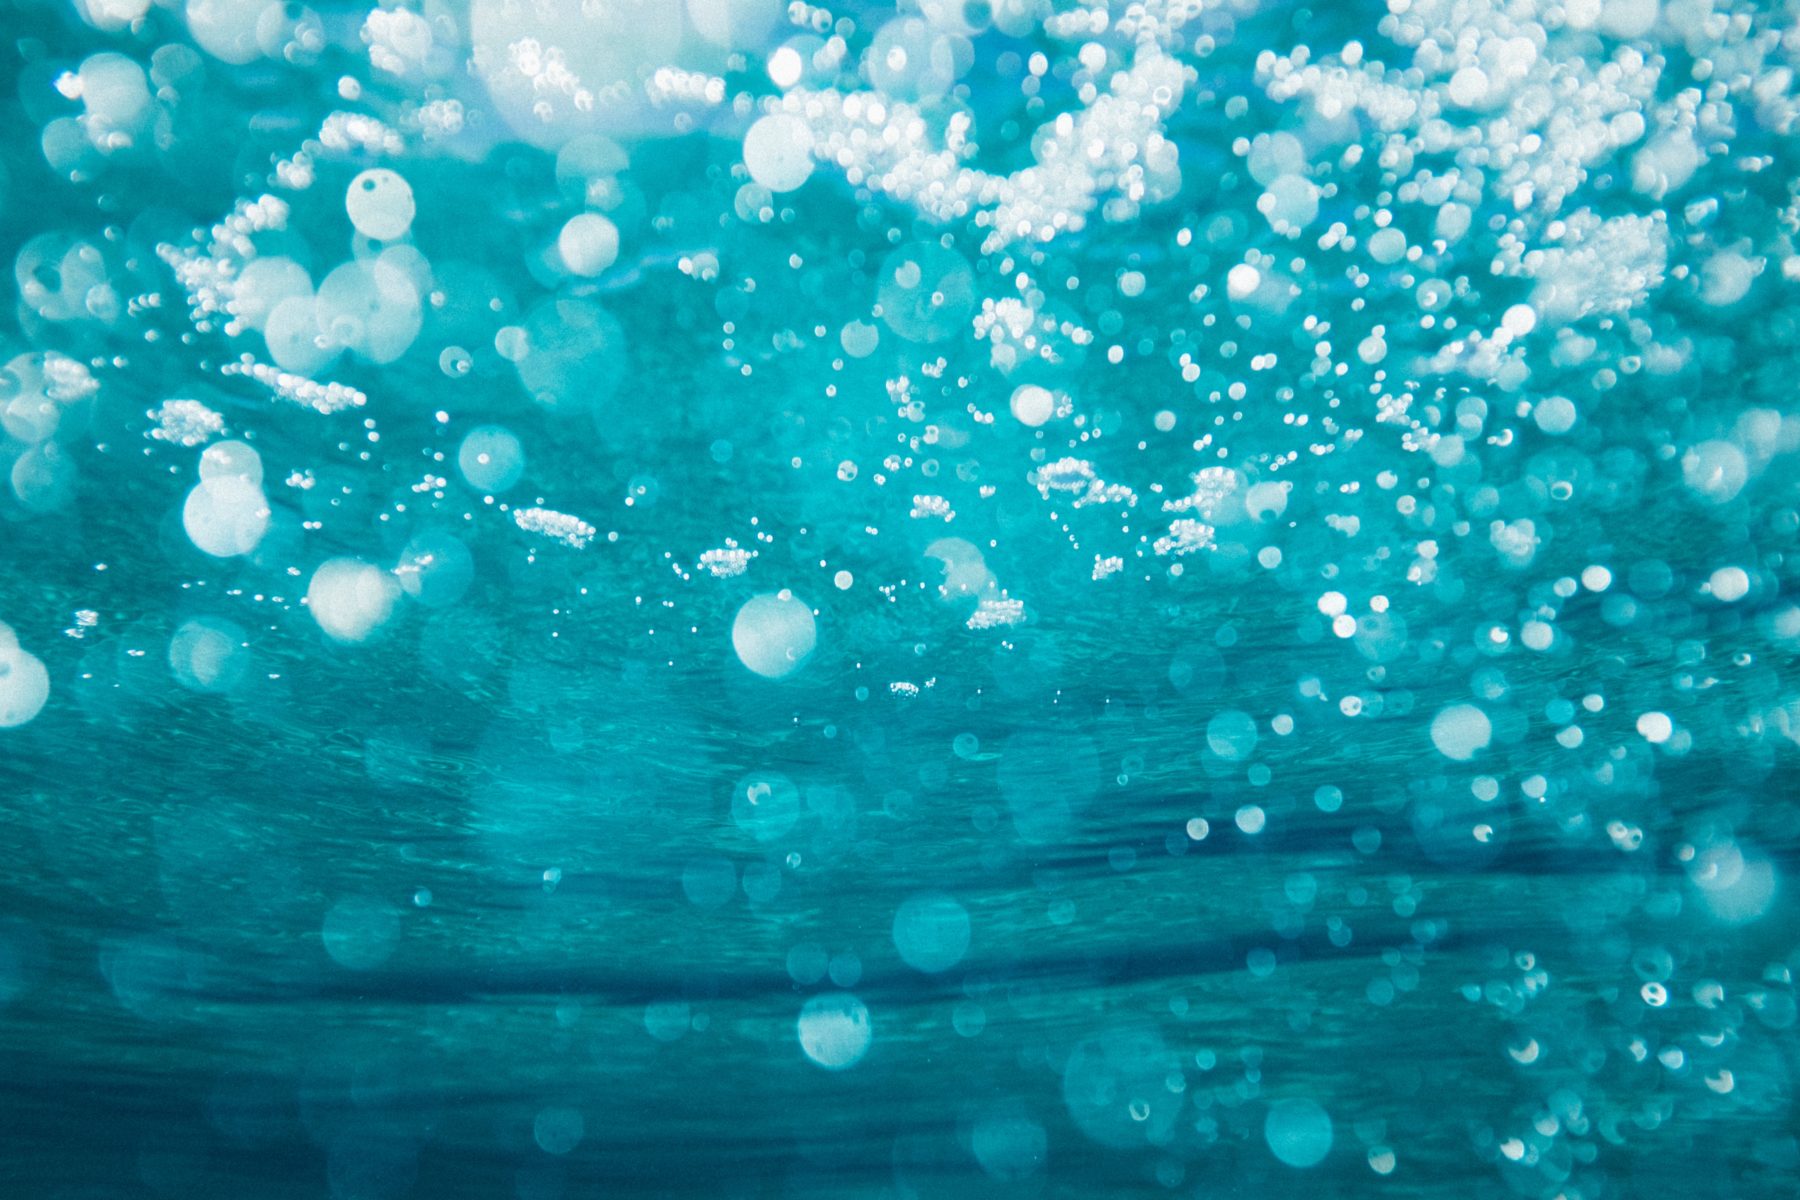 An underwater photo with bubbles around.